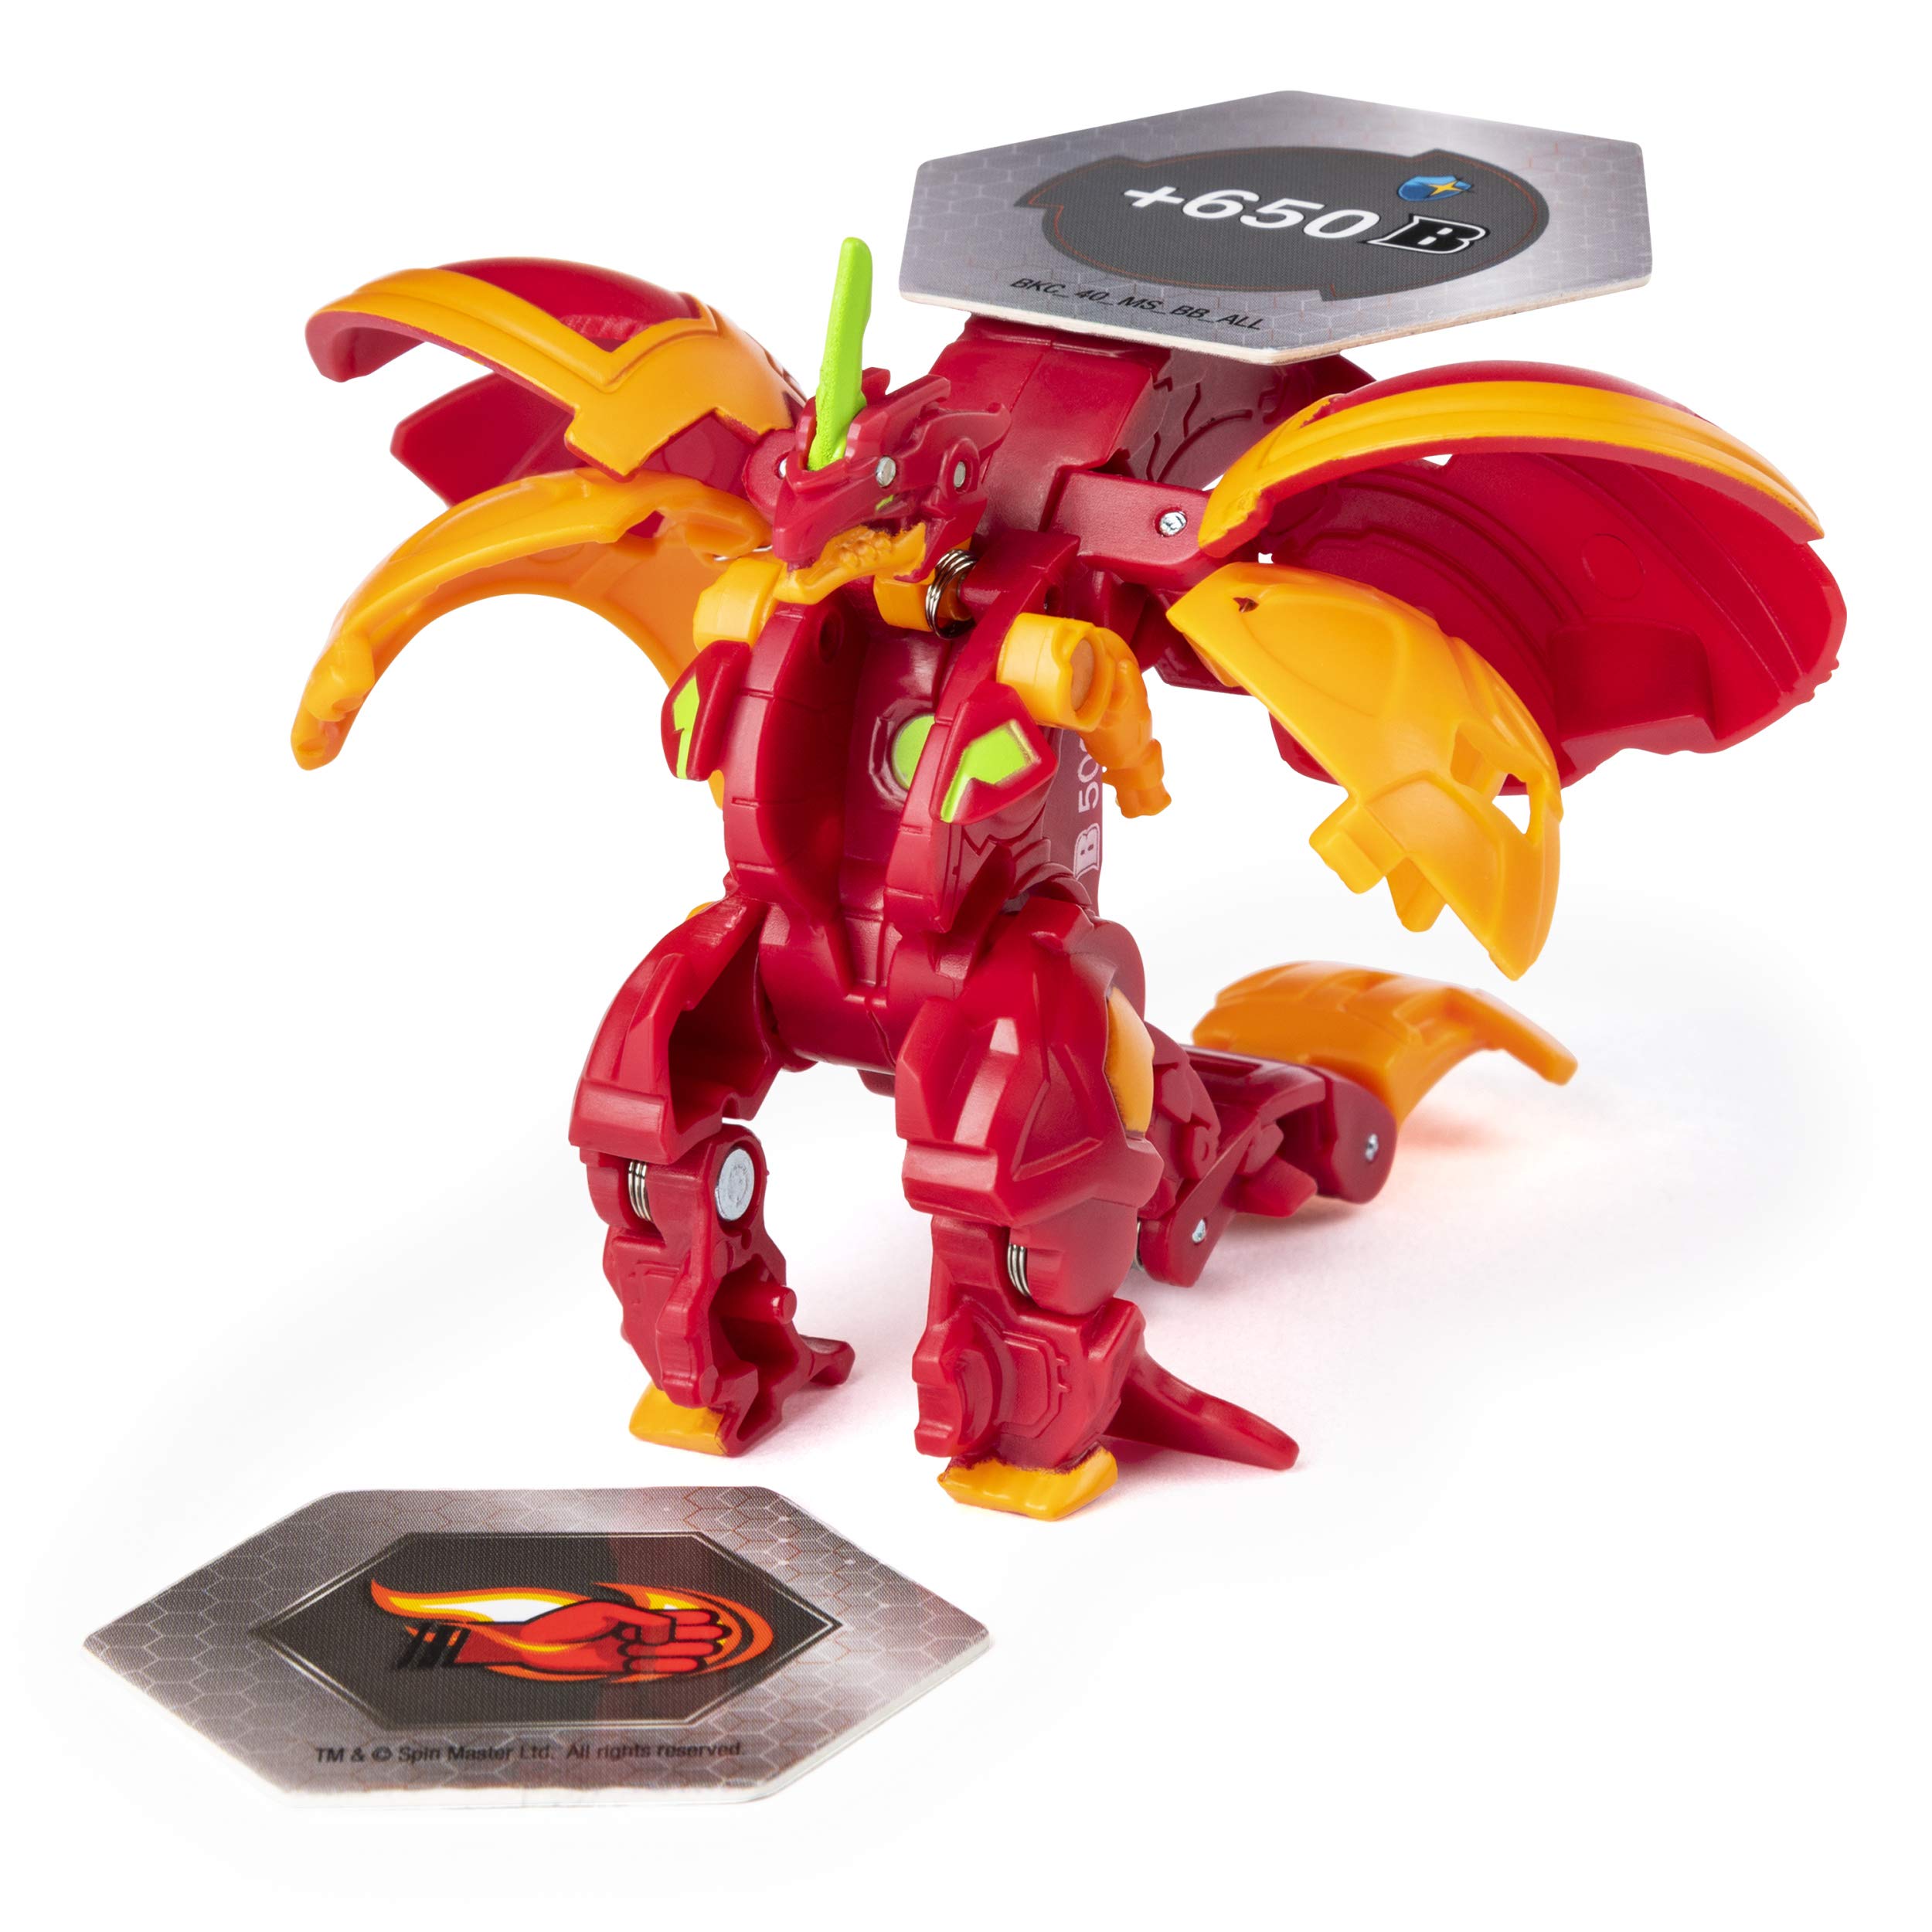 Bakugan Ultra, Hyper Dragonoid, 3-inch Tall Collectible Transforming Creature, for Ages 6 and Up